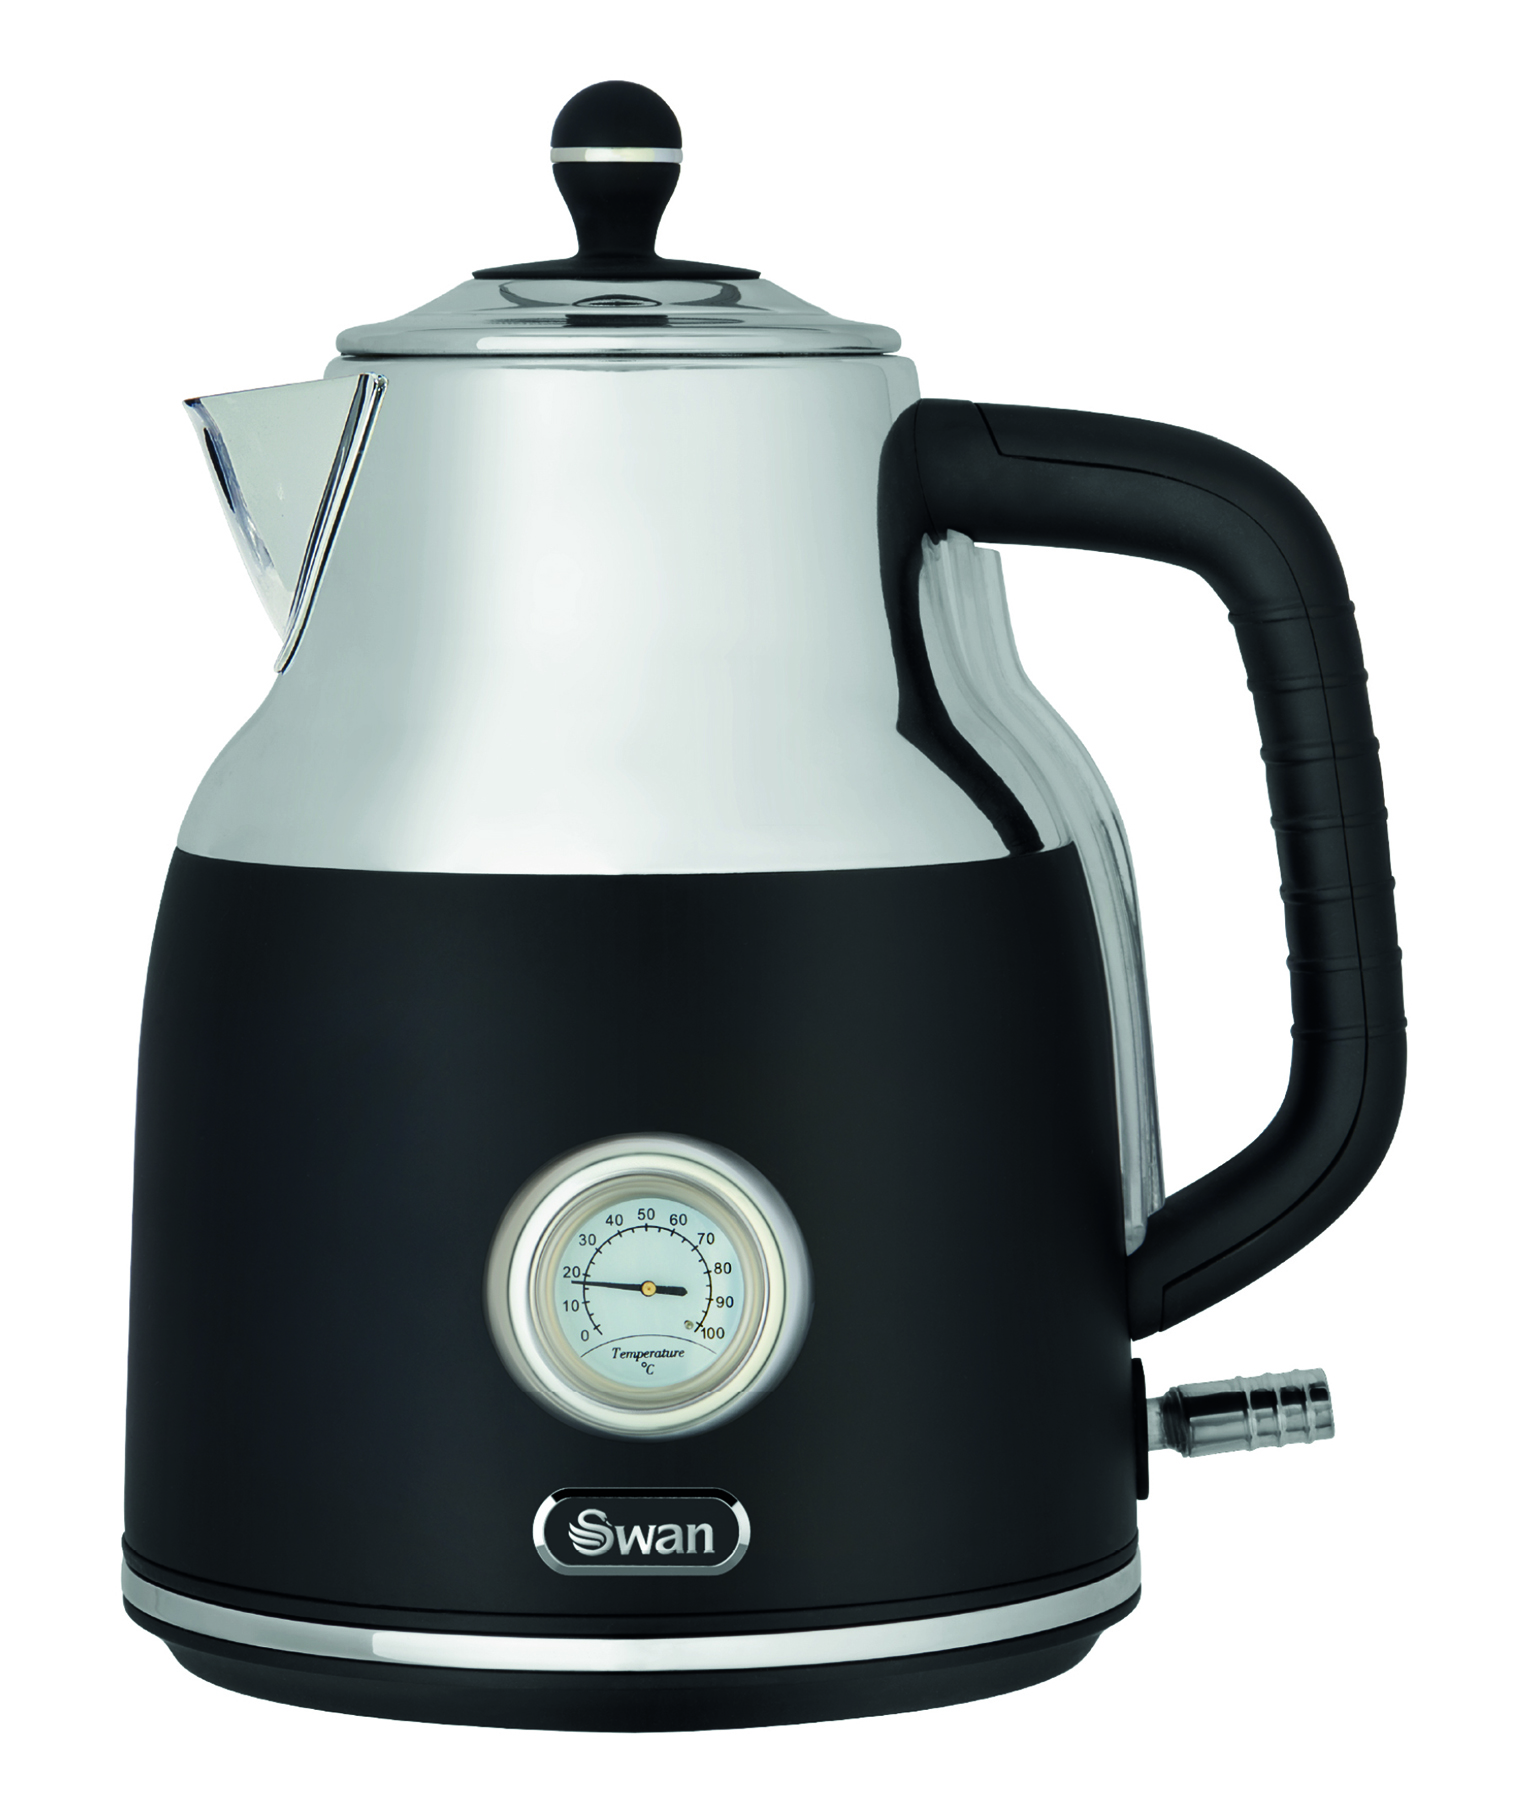 Russell Hobbs Retro Style 1.7L Electric Kettle, Heavenly Blue